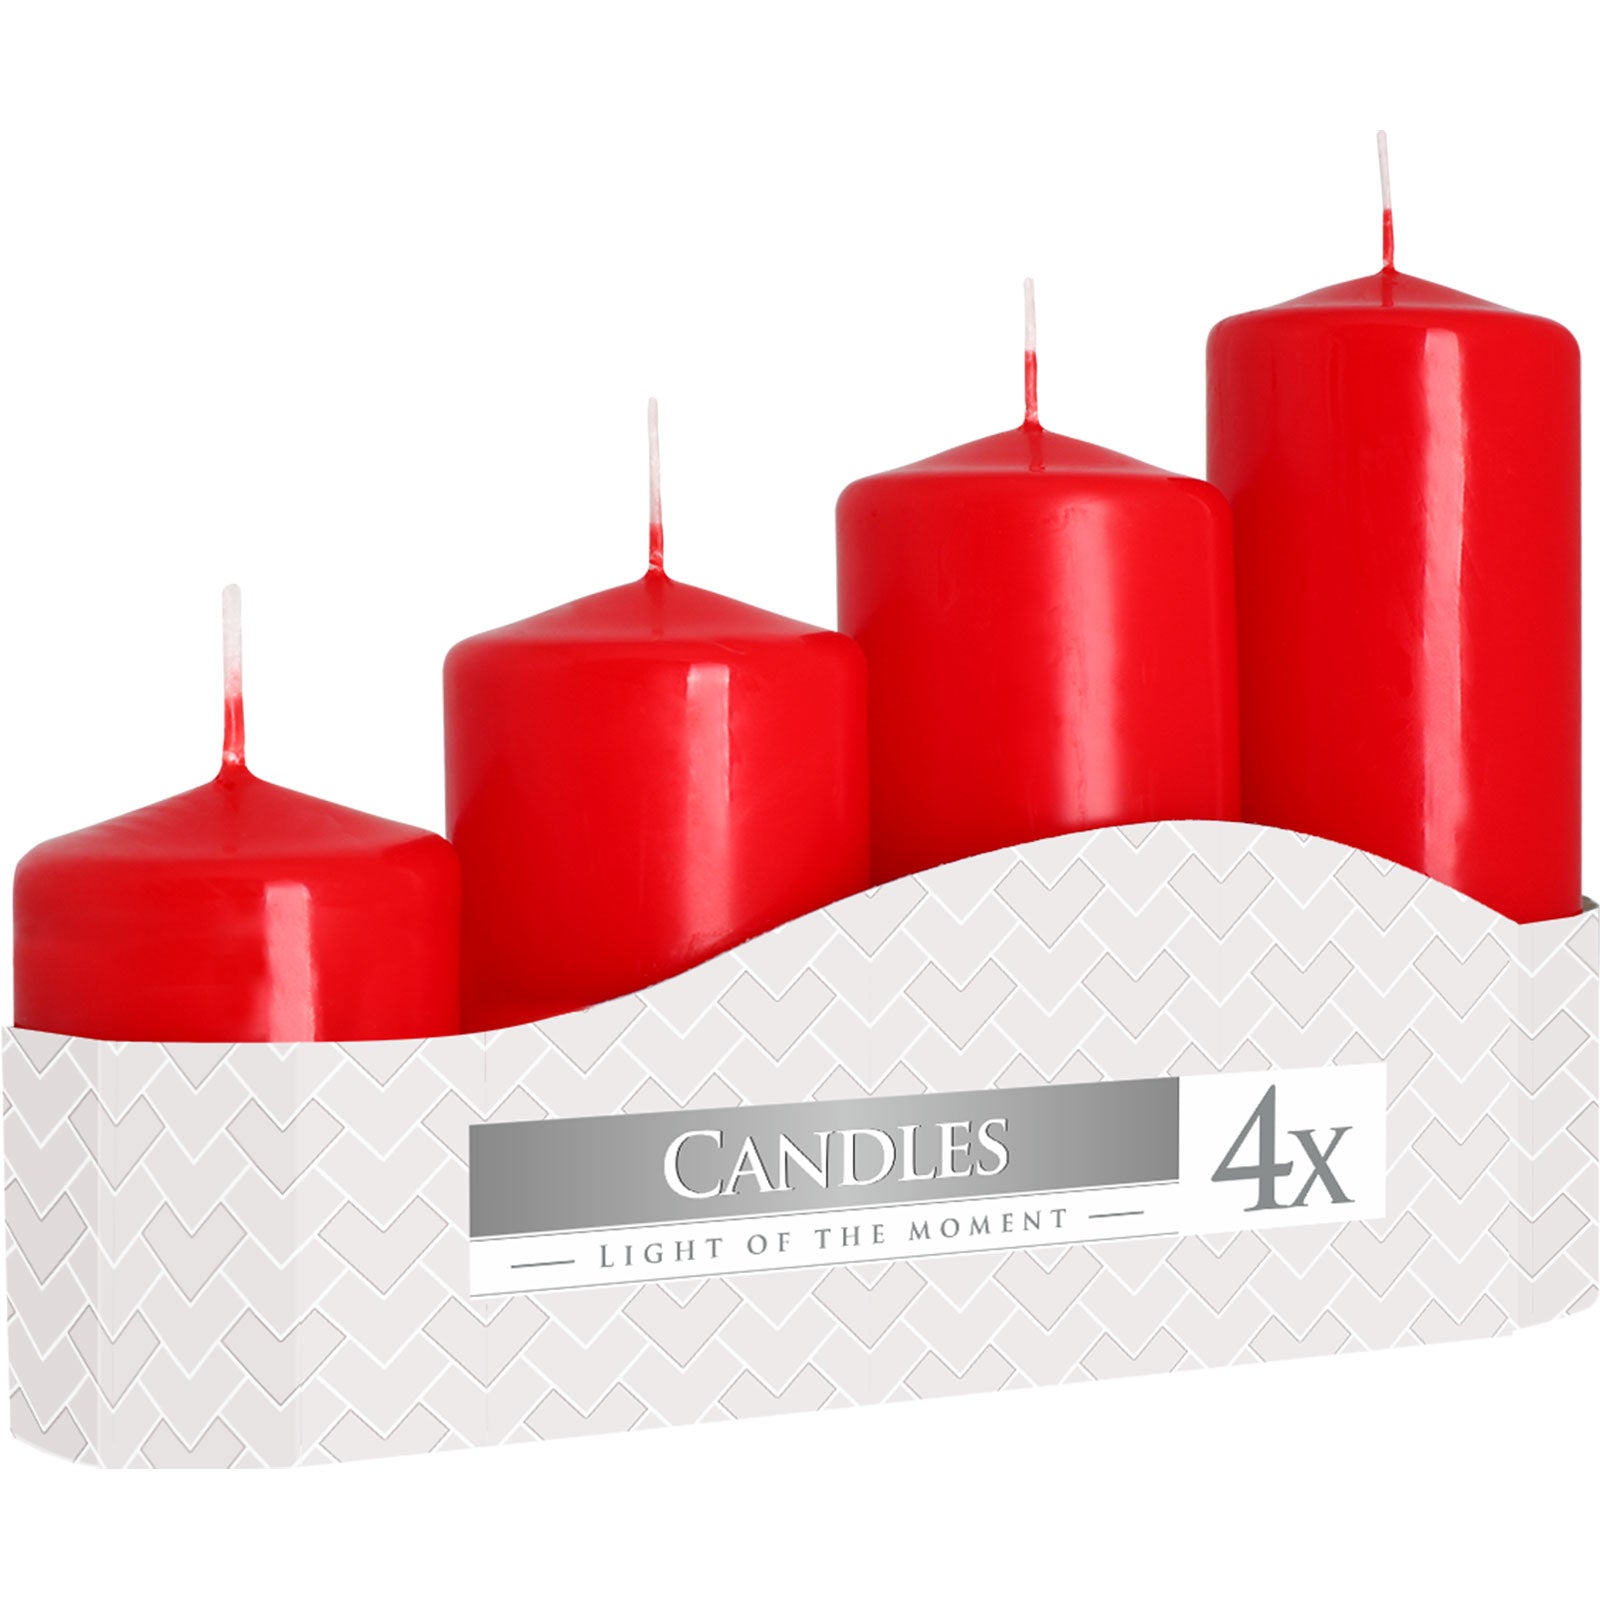 View Set of 4 Pillar Candles 50mm 11162233H Red information